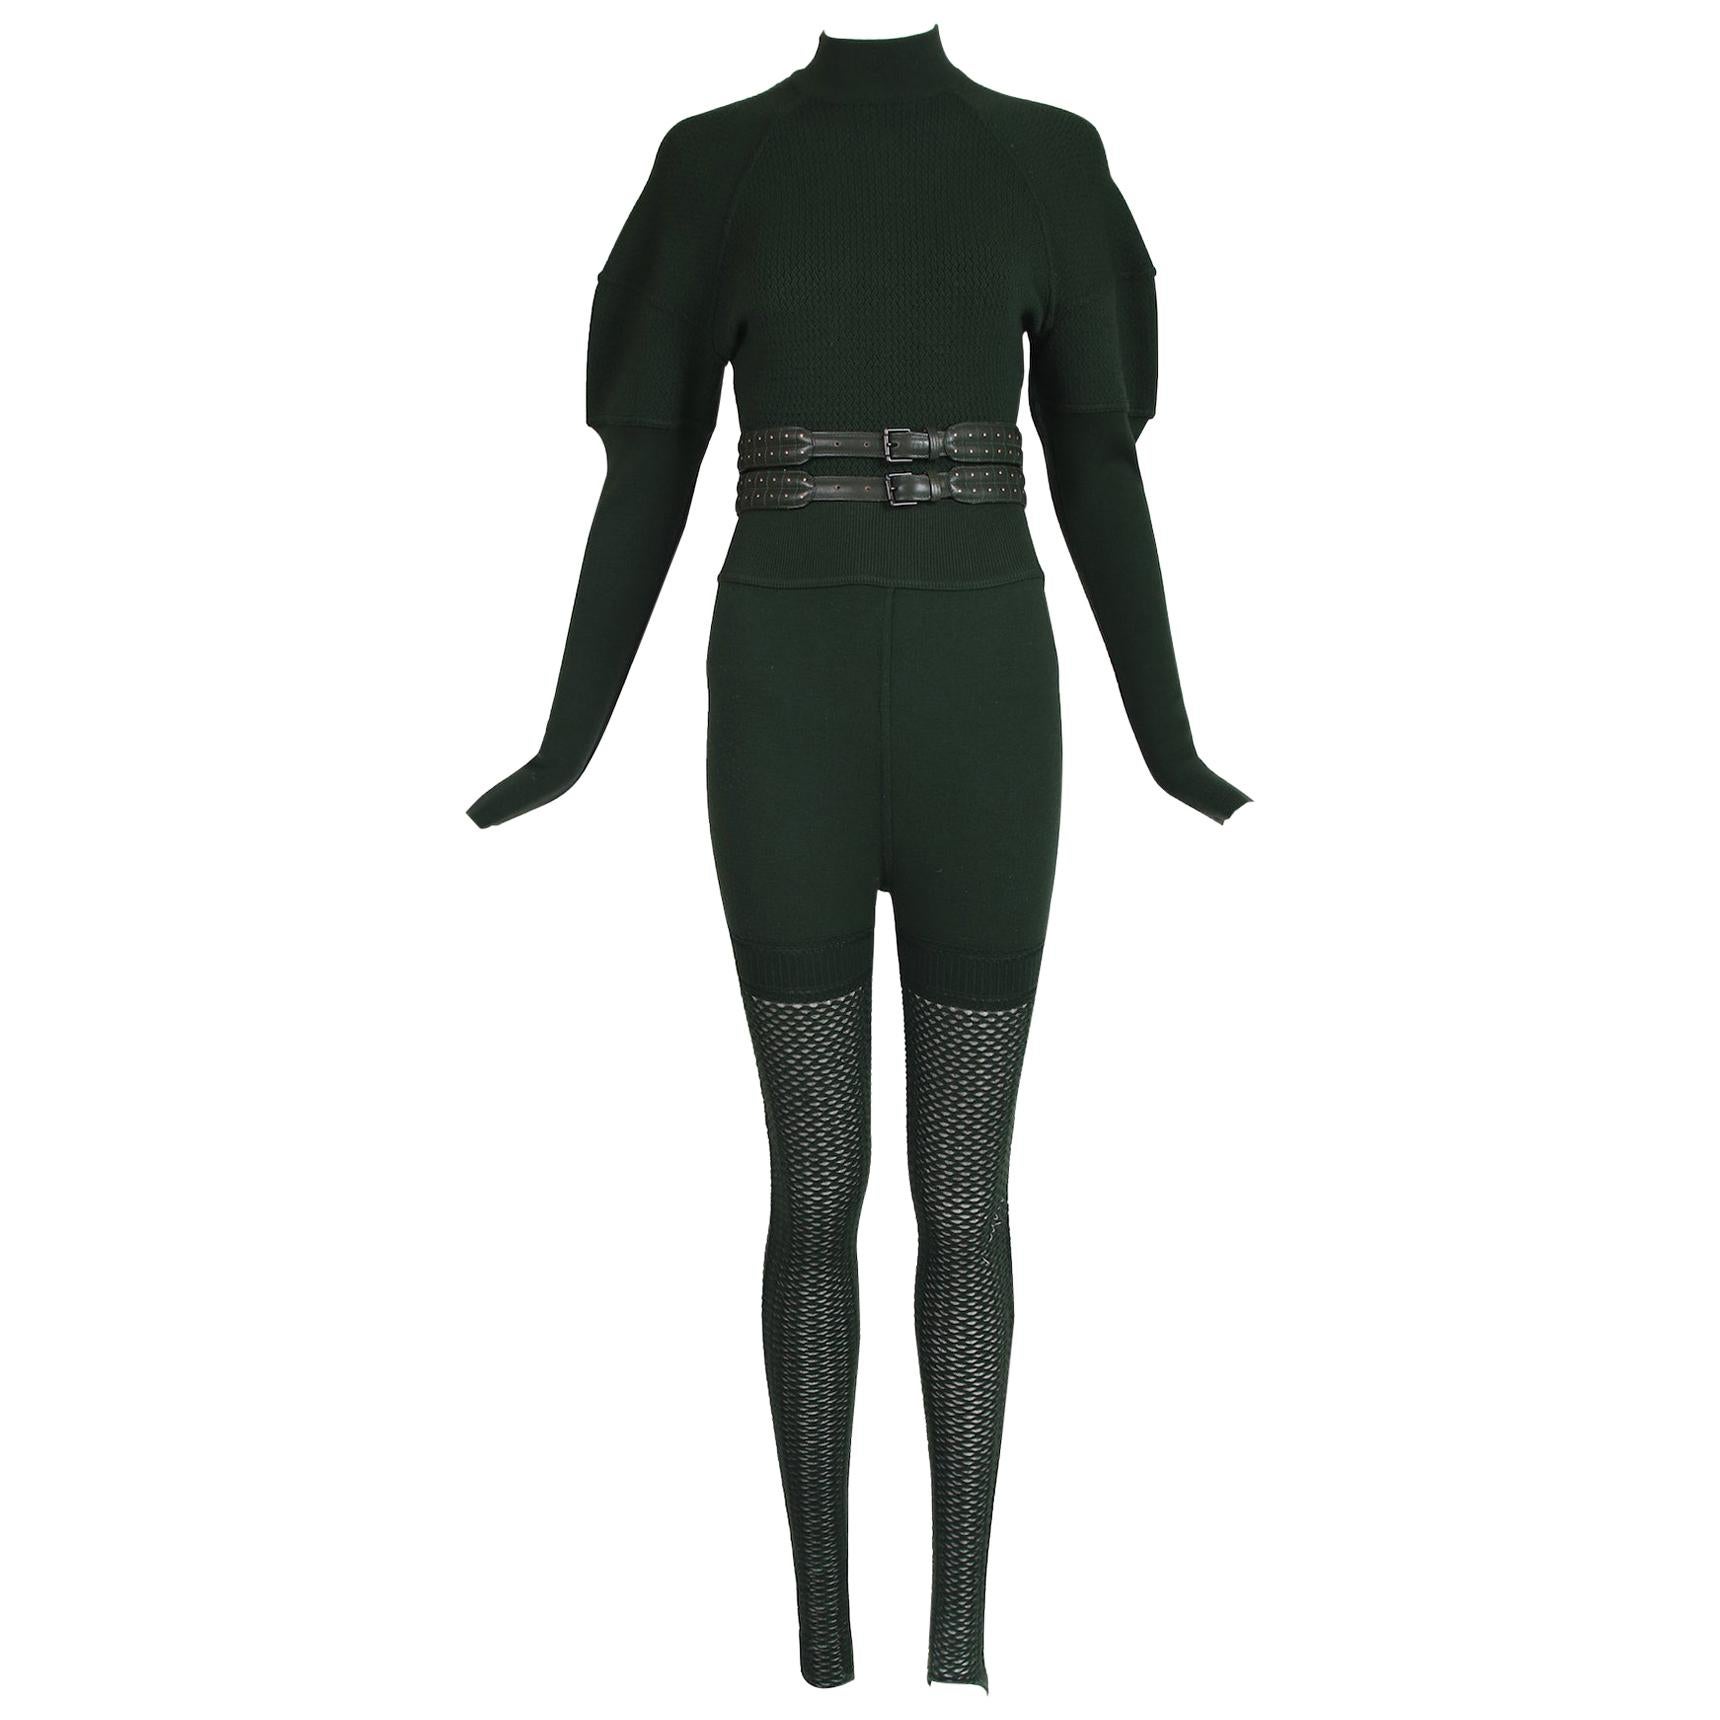 Alaia Green Knit Body Suit, Stirrup Leggings & Matching Leather Belt For Sale